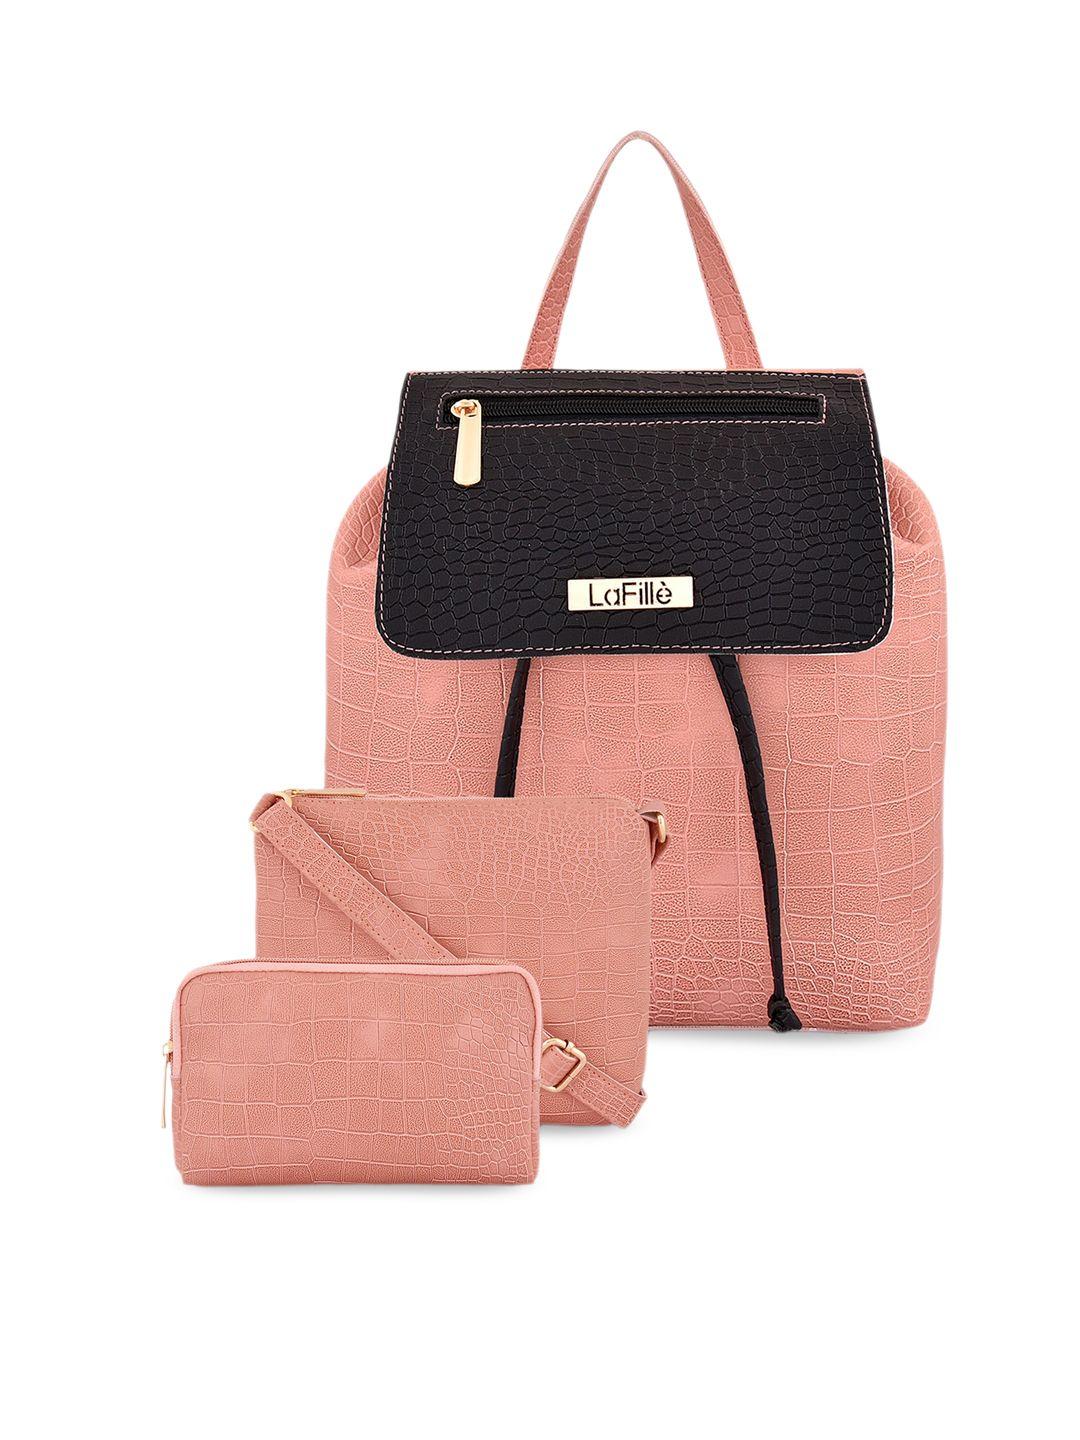 lafille peach-coloured colourblocked pu structured handheld bag with cut work